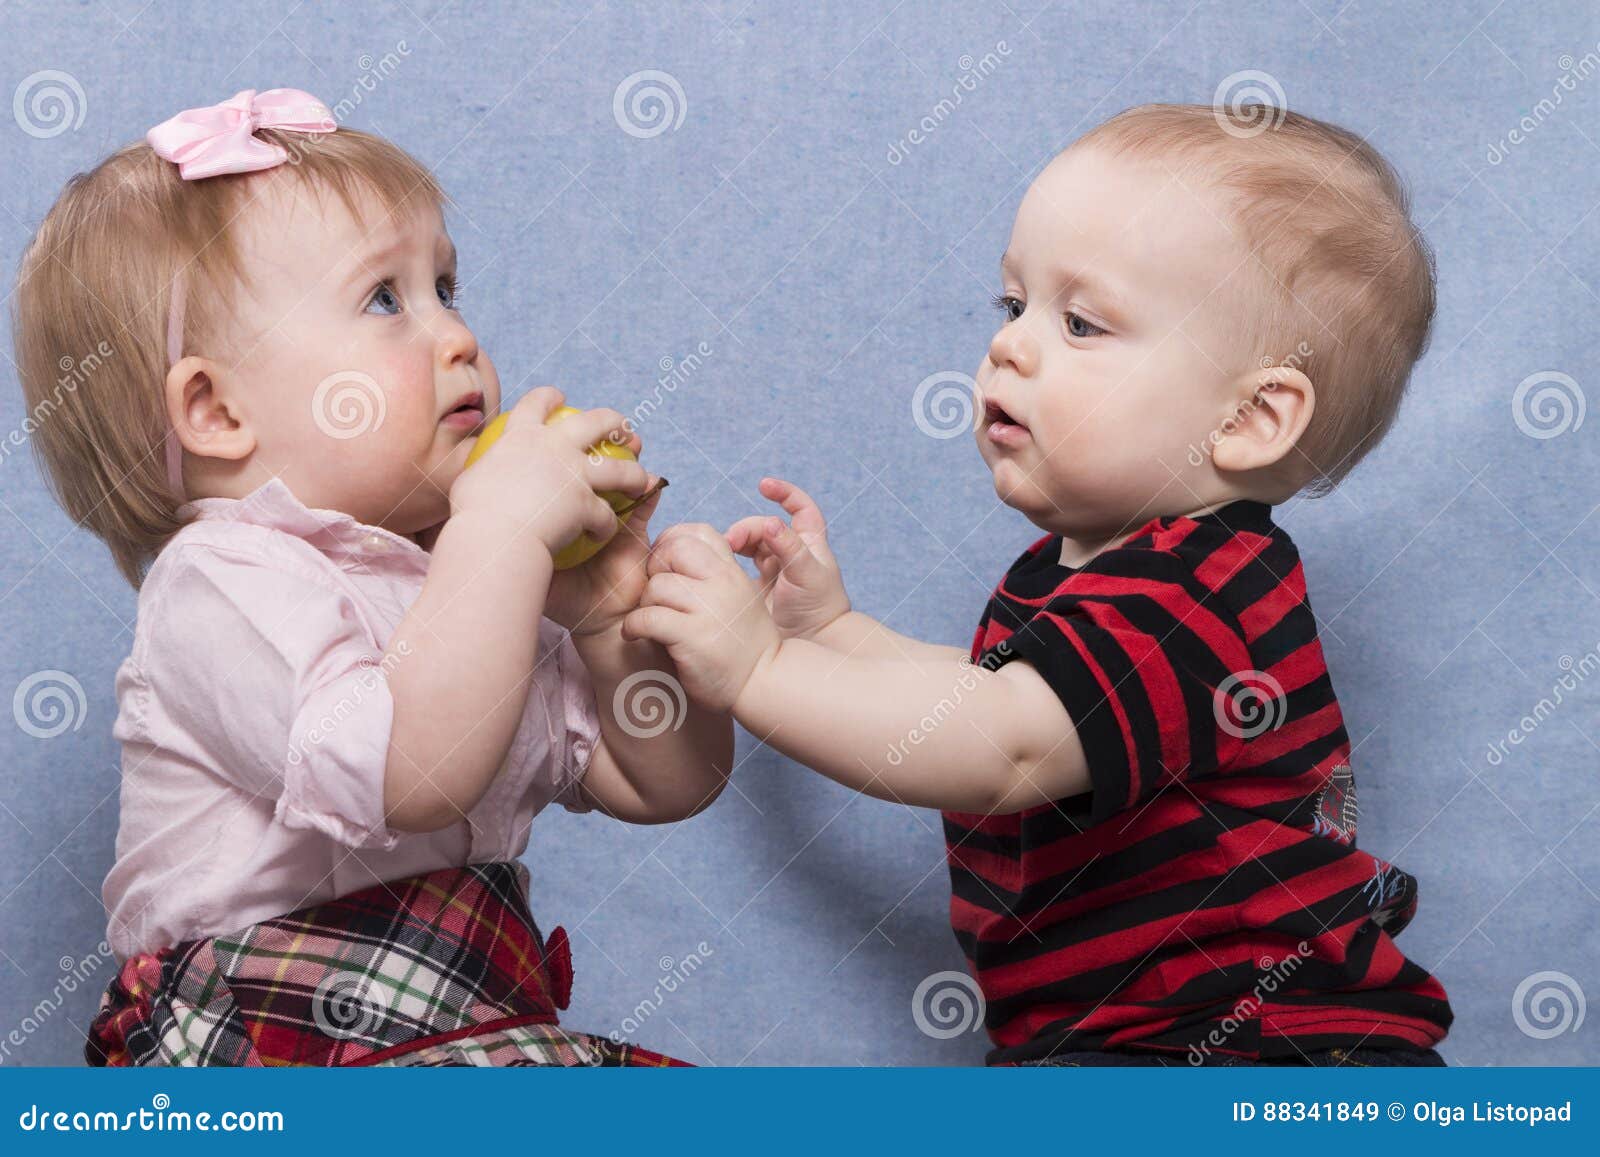 Cute Baby Boy and Lovely Baby Girl Playing Together Stock Image ...